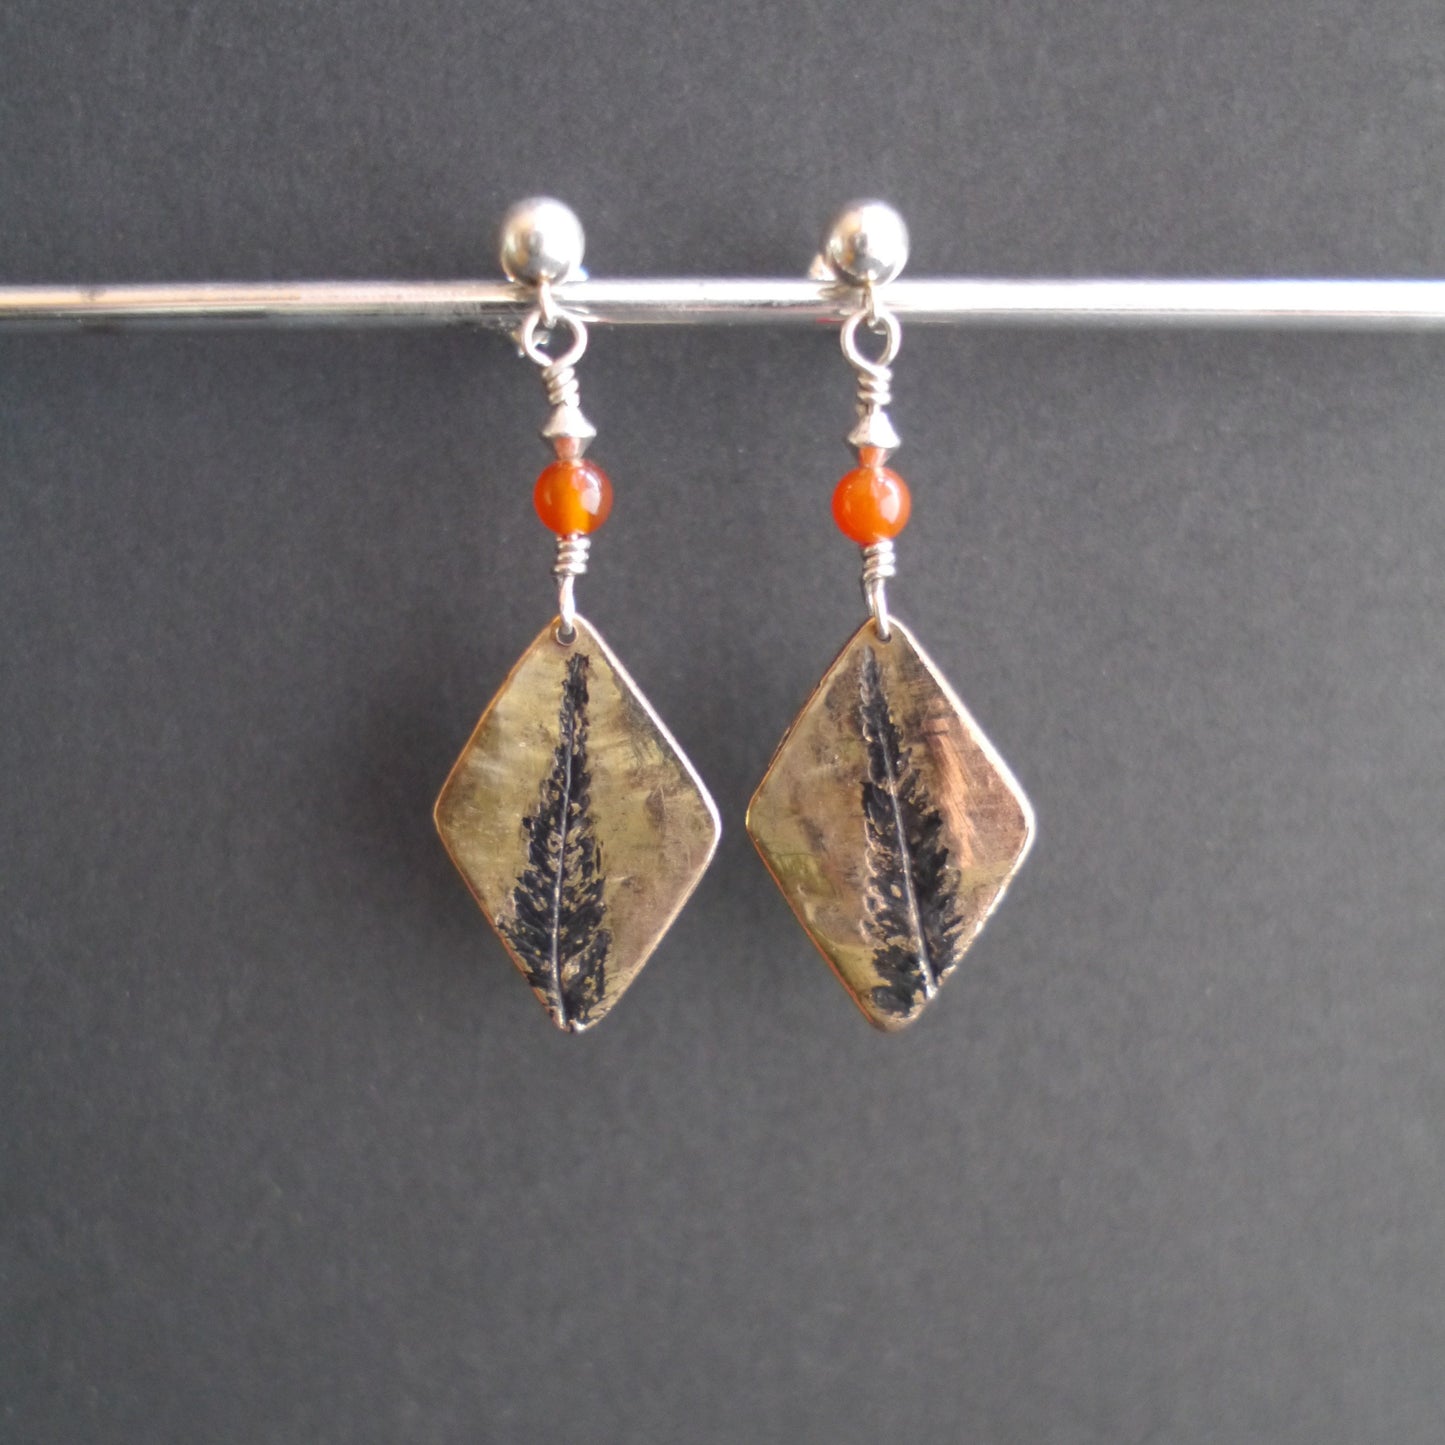 Natural Fern Earrings in Bronze with Fire Agate